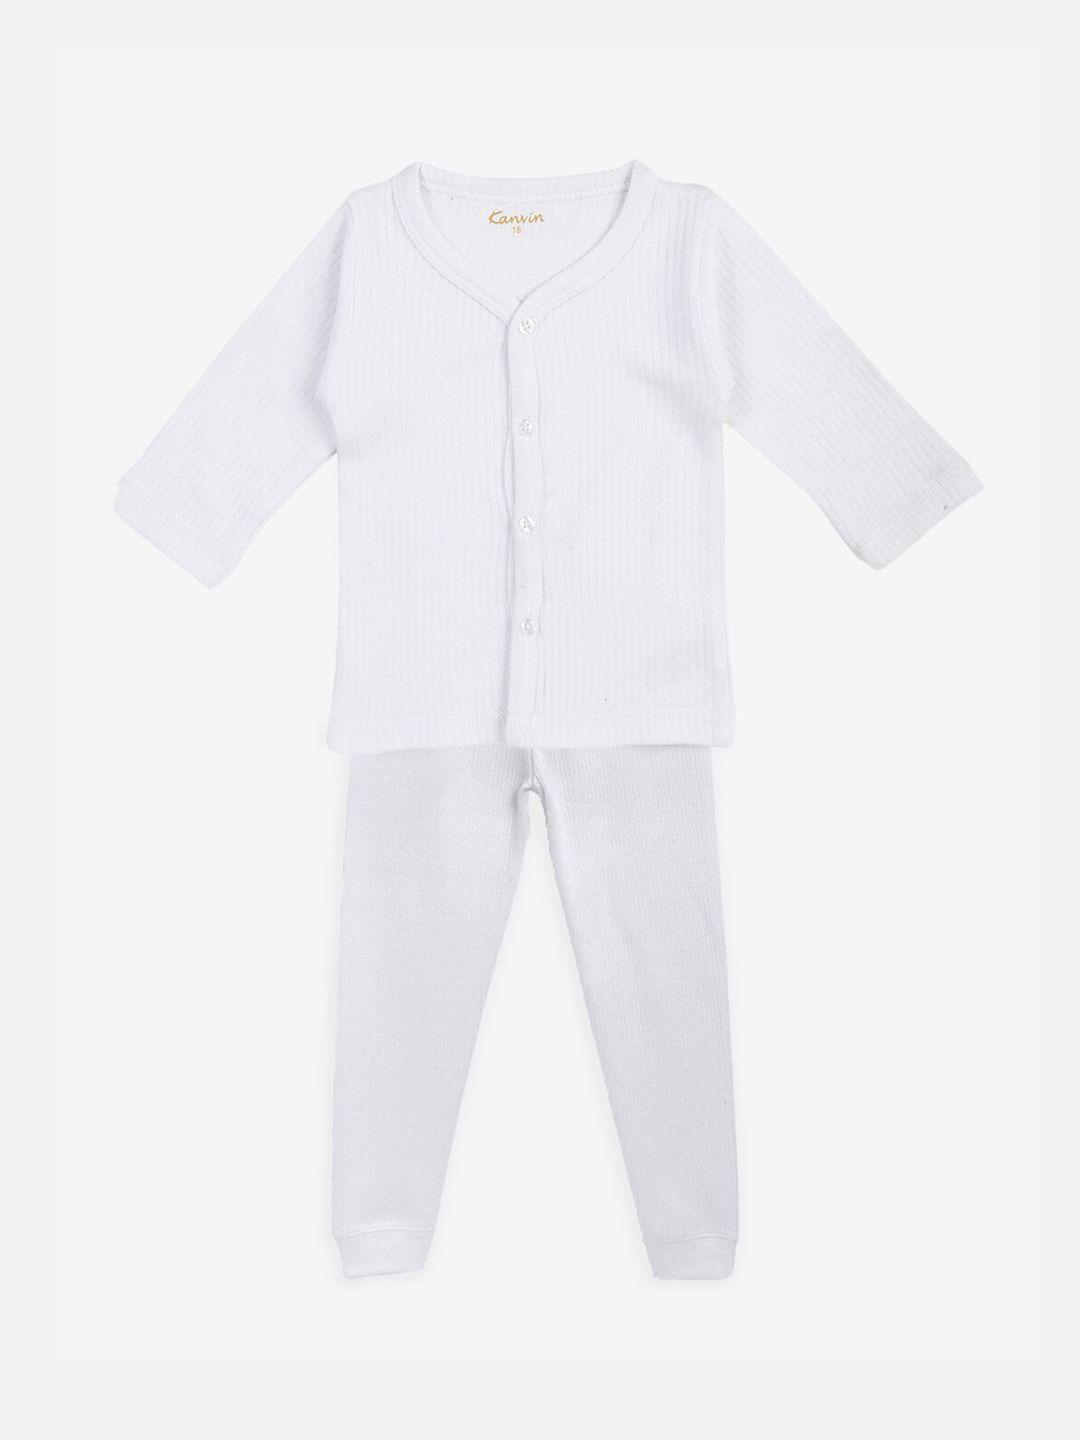 kanvin boys white solid thermal set